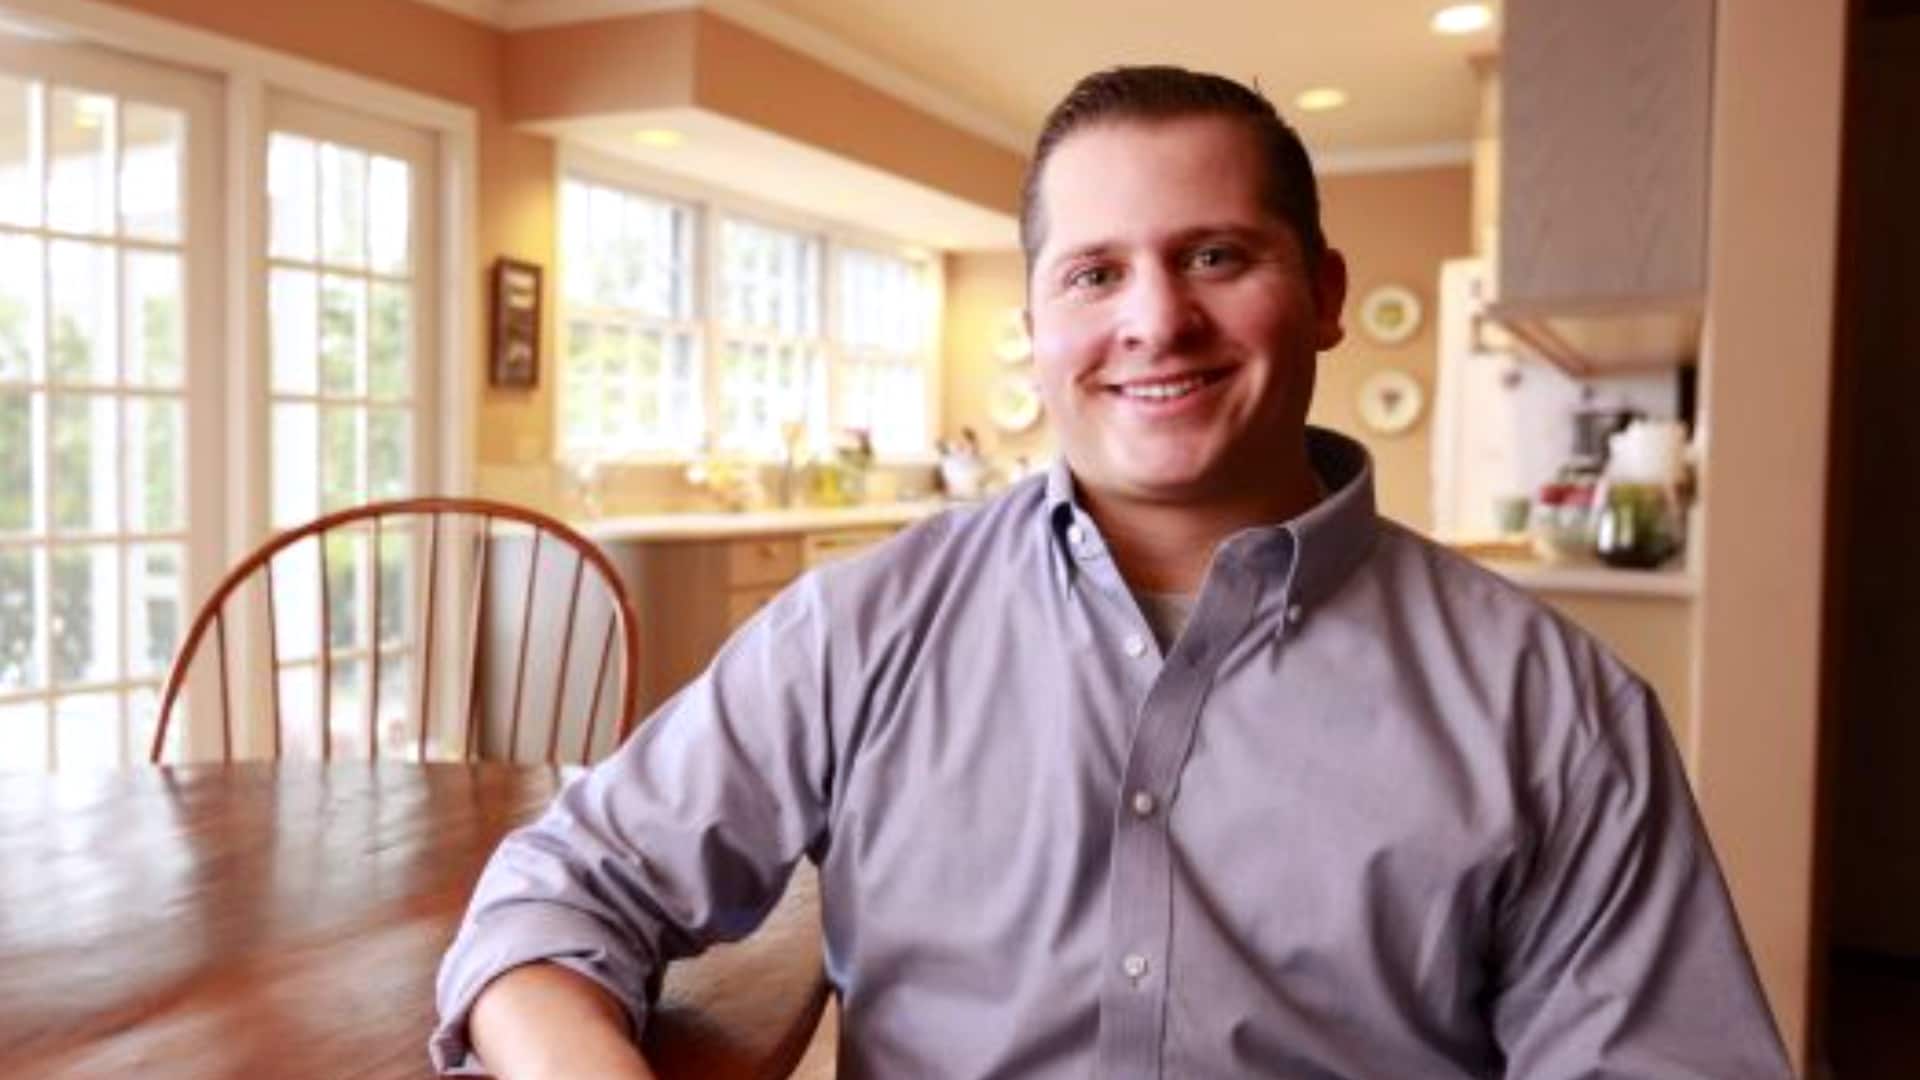 Peter Forcelli, who earned his master's in healthcare administration in 2015, sitting at a kitchen table in a buttondown dress shirt.